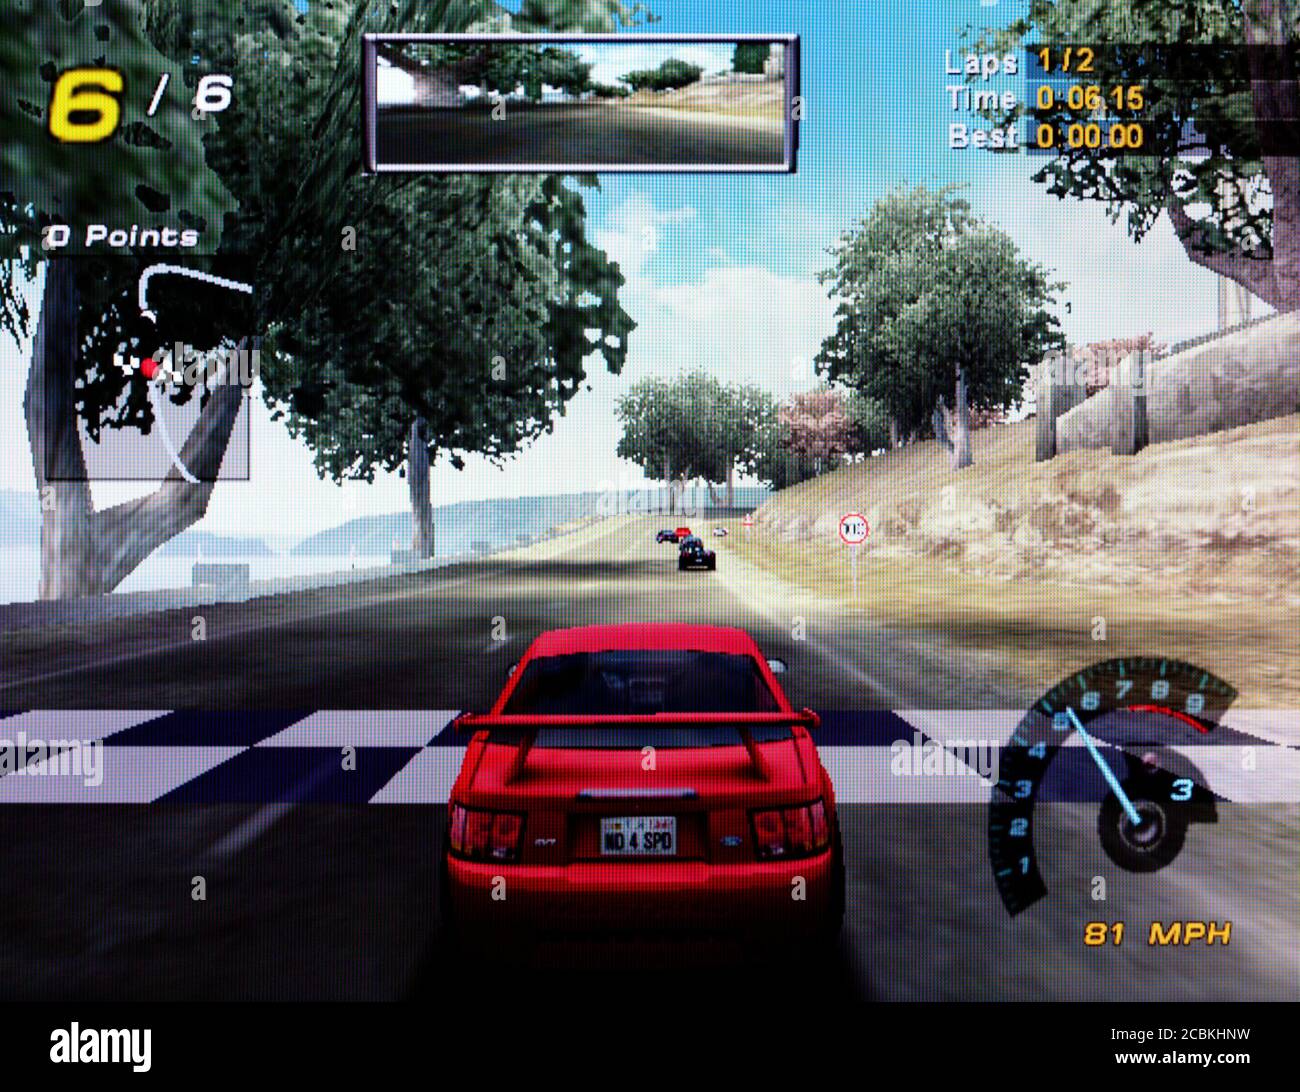 Need for Speed Hot Pursuit - Descargar